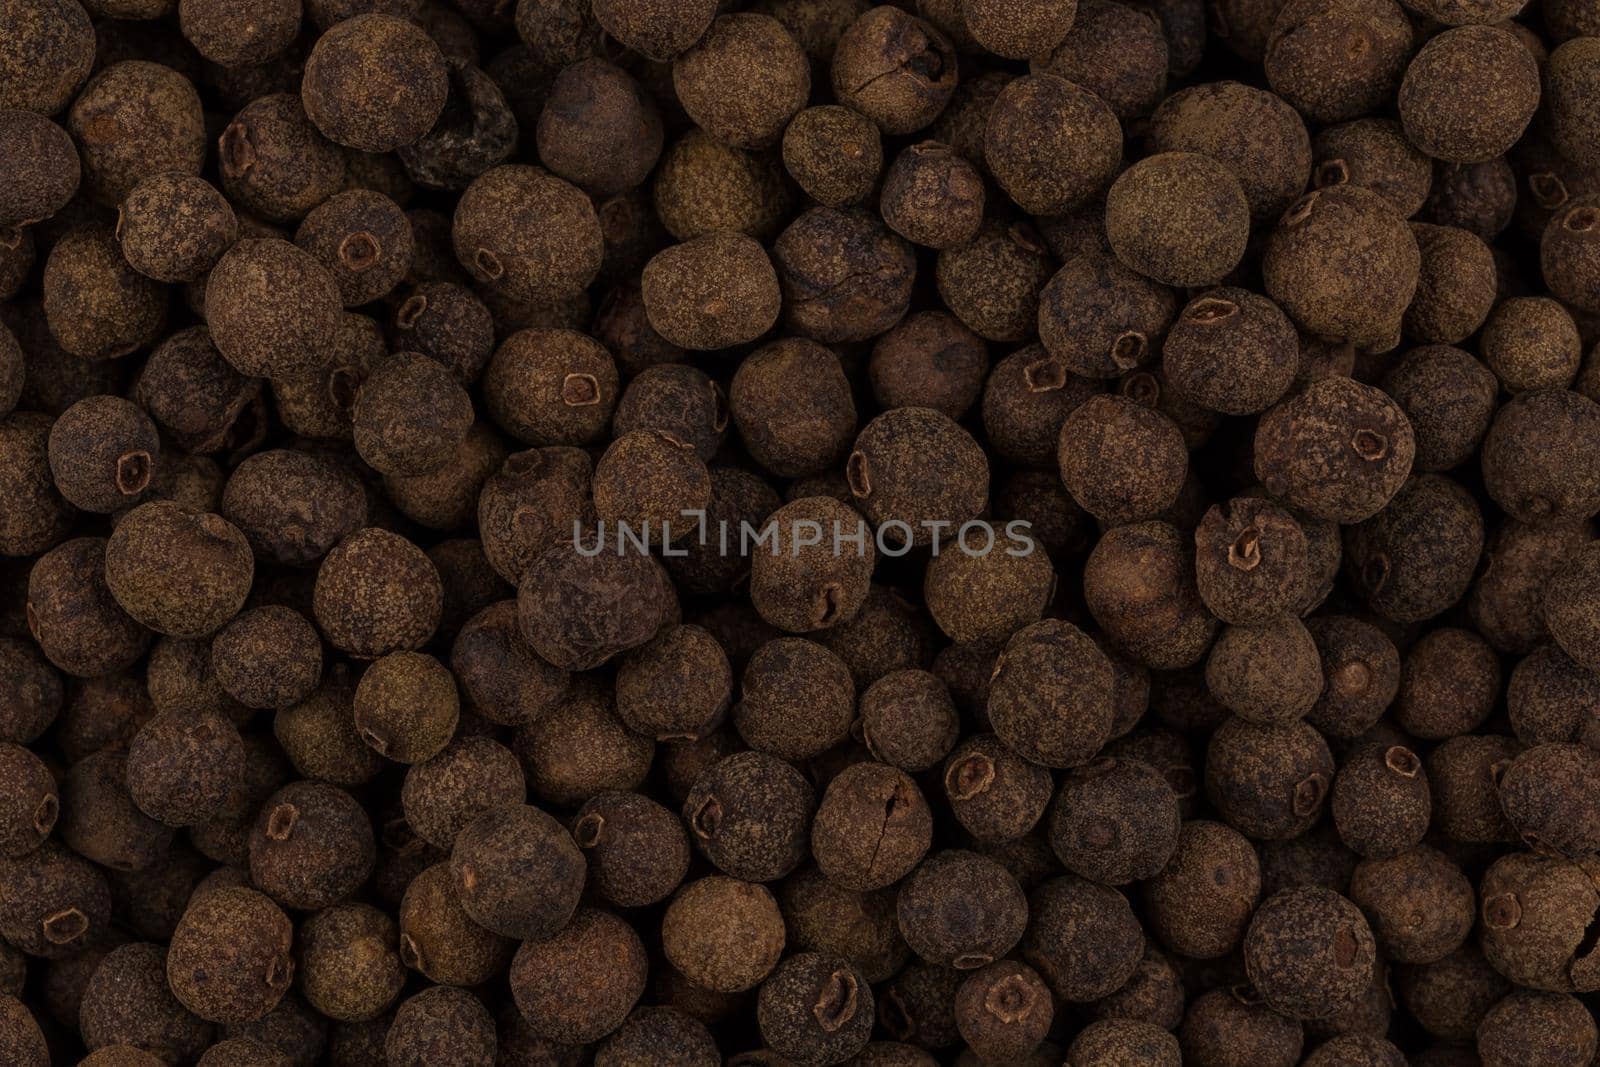 Pepper seeds by RTsubin